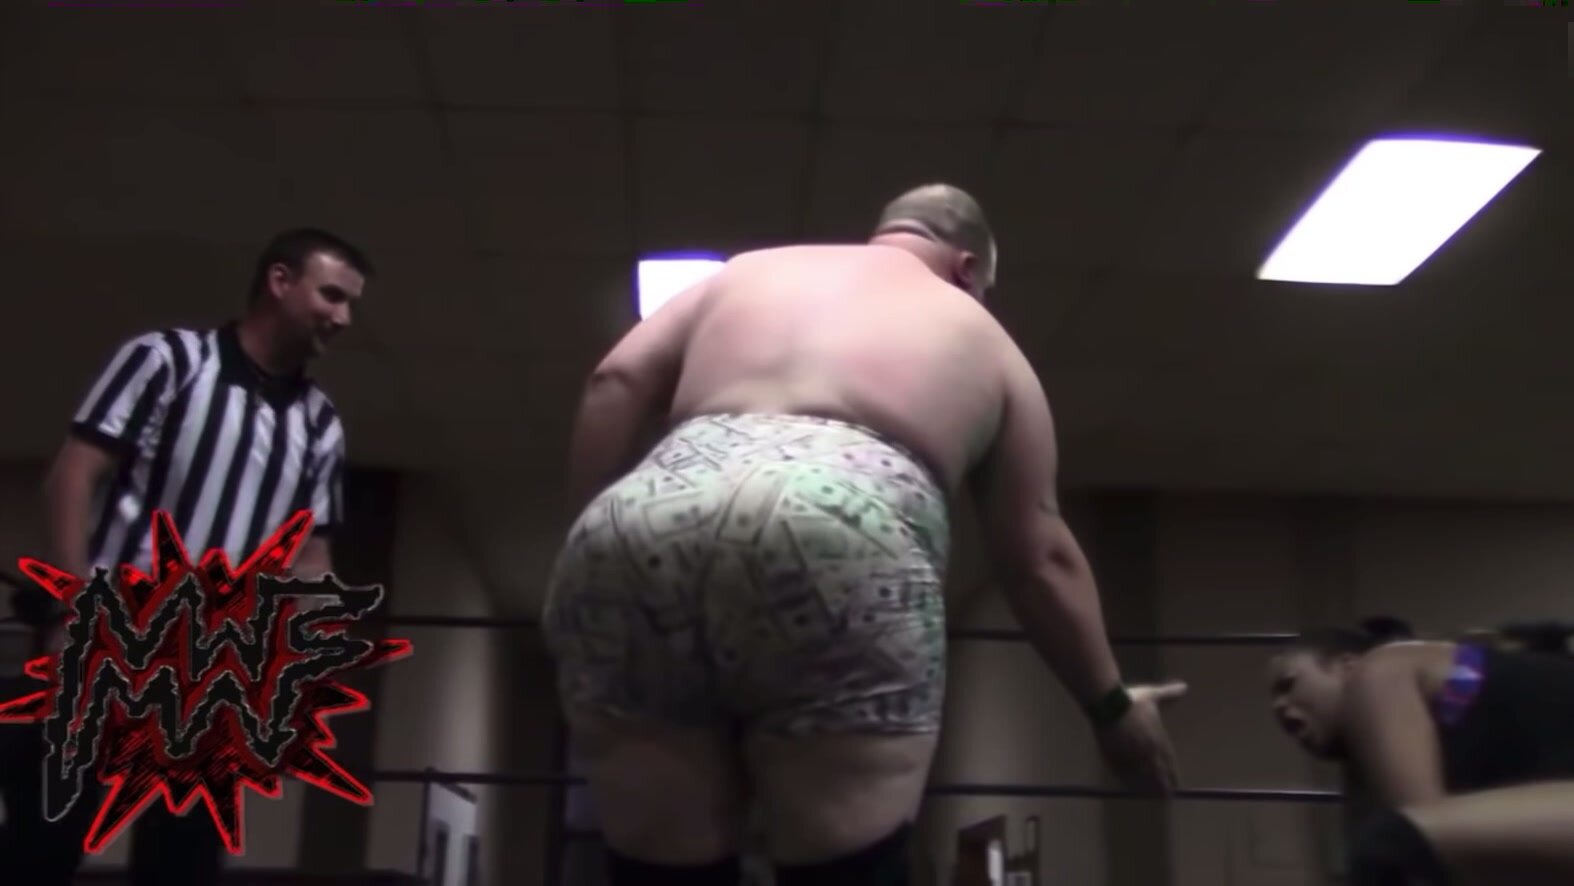 Wrestler dude with massive booty